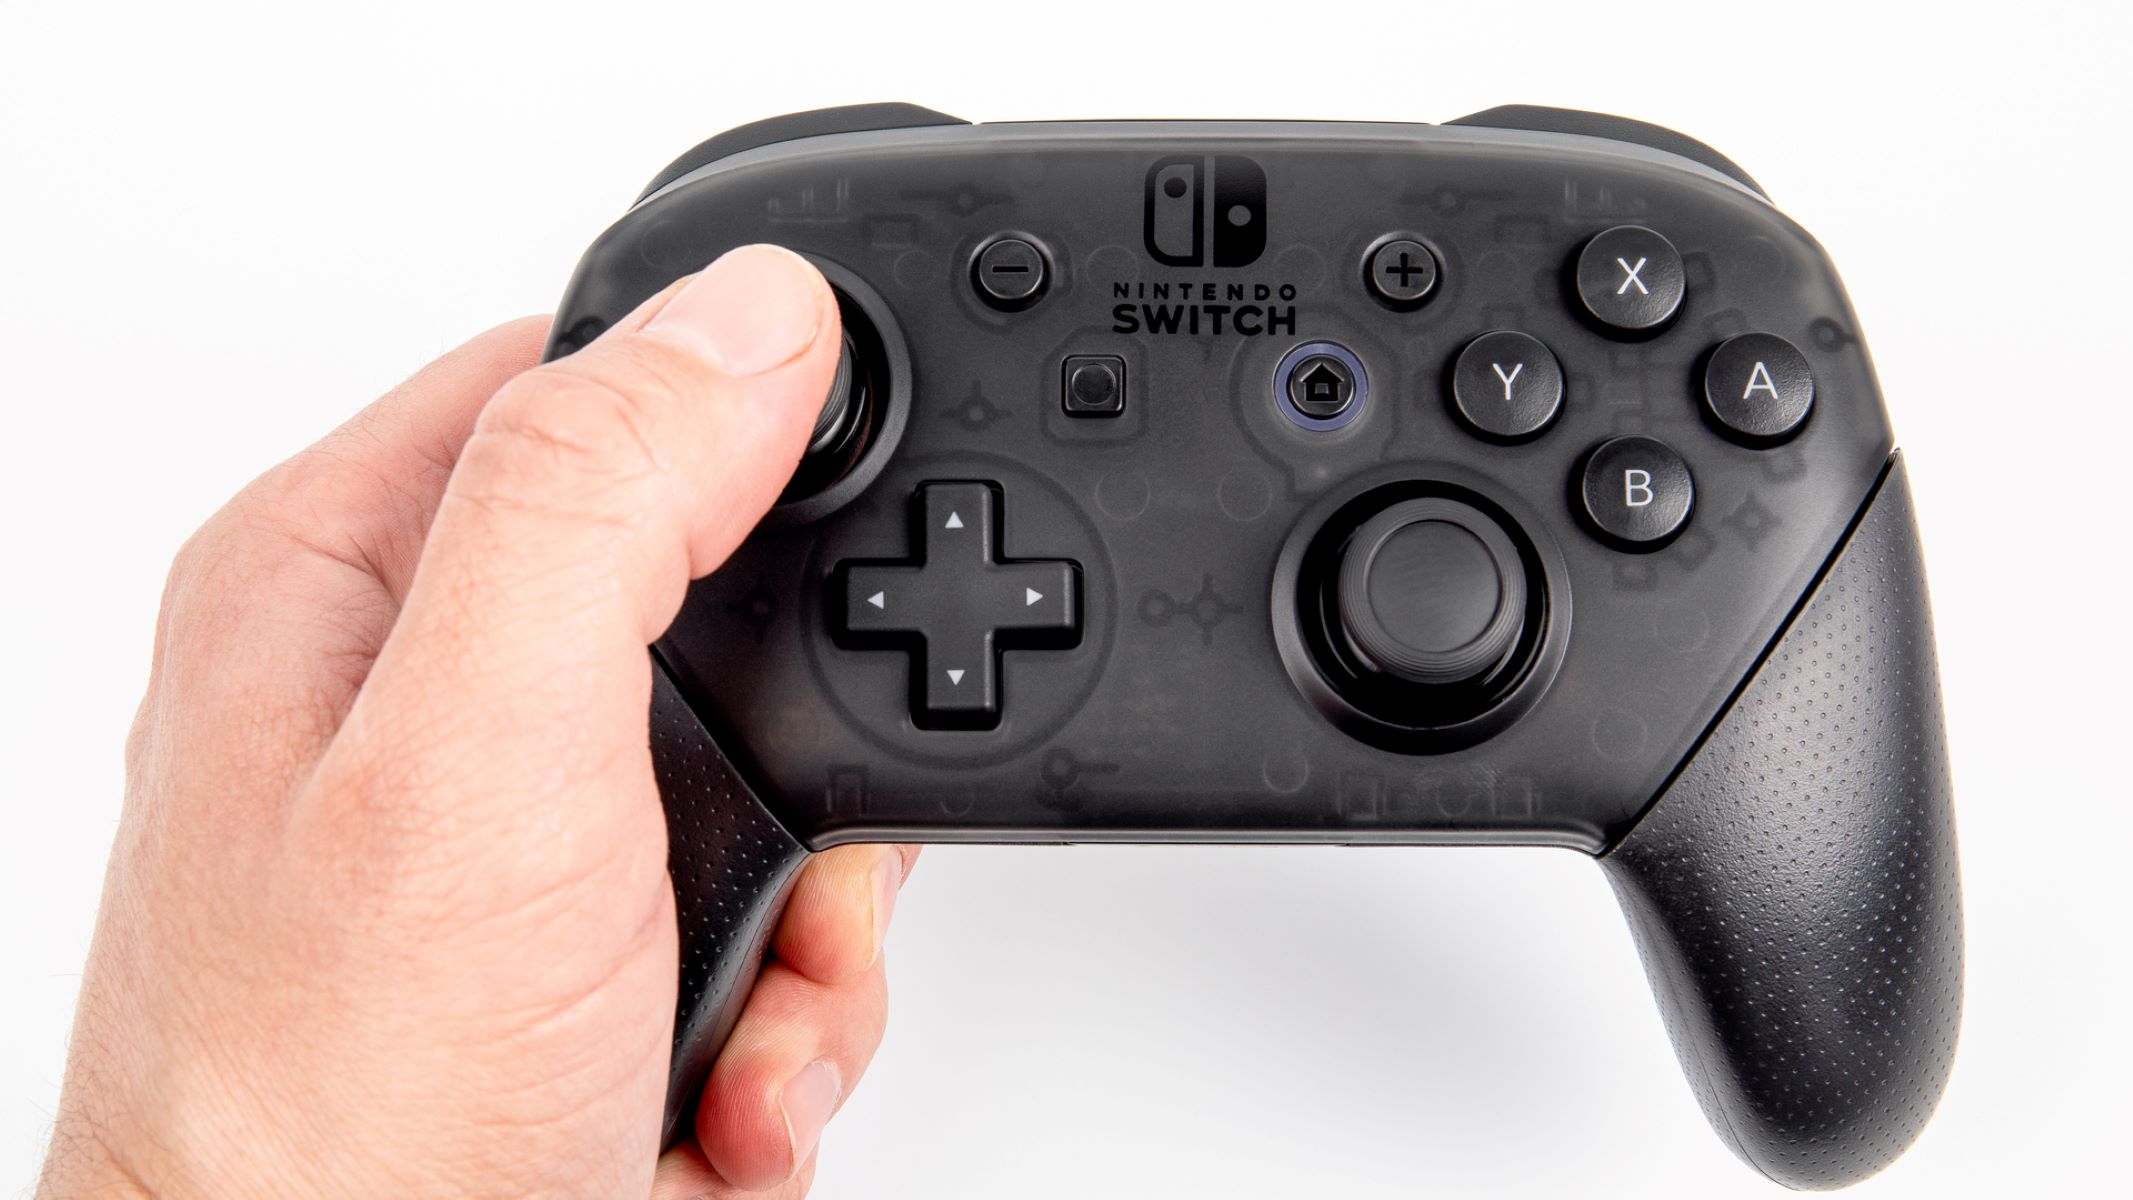 How To Connect A Nintendo Switch Game Controller To PC